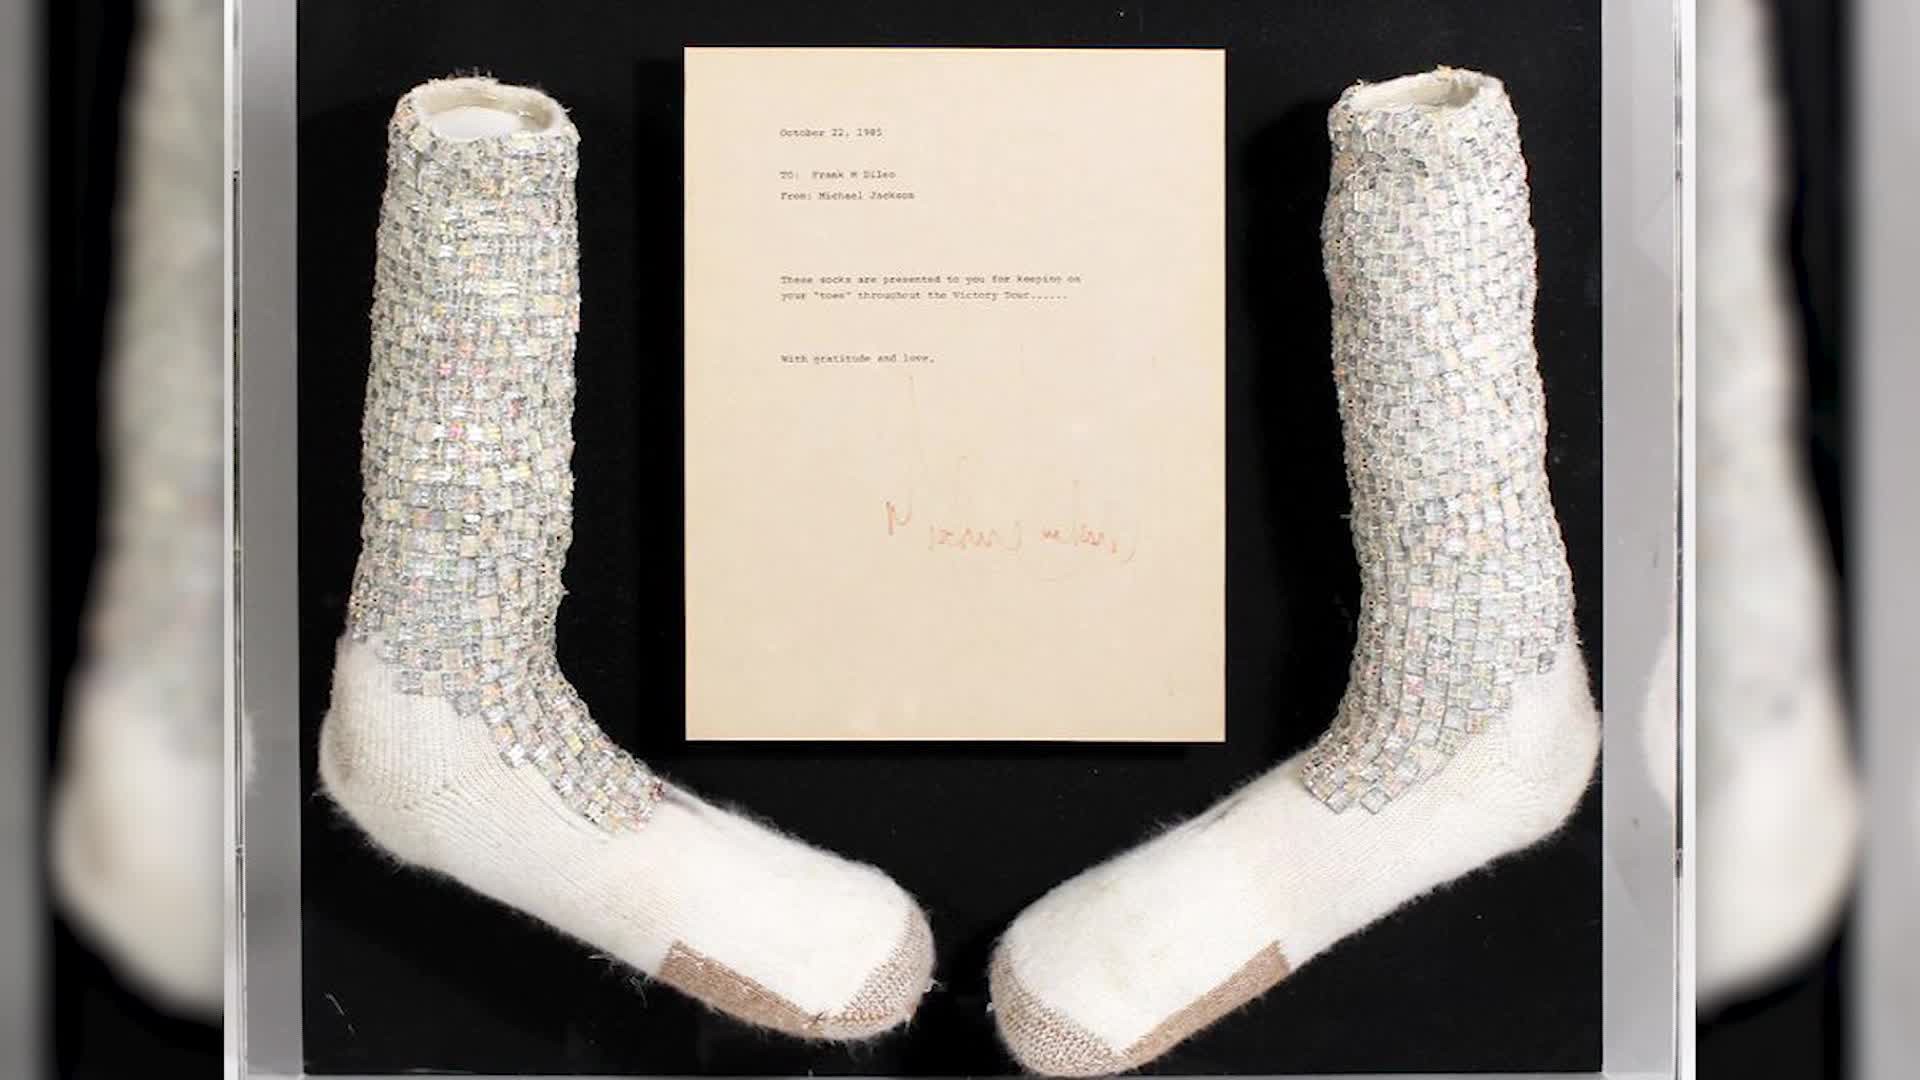 Michael Jackson's socks from his first on-stage moonwalk are going up for auction, could fetch $2 million